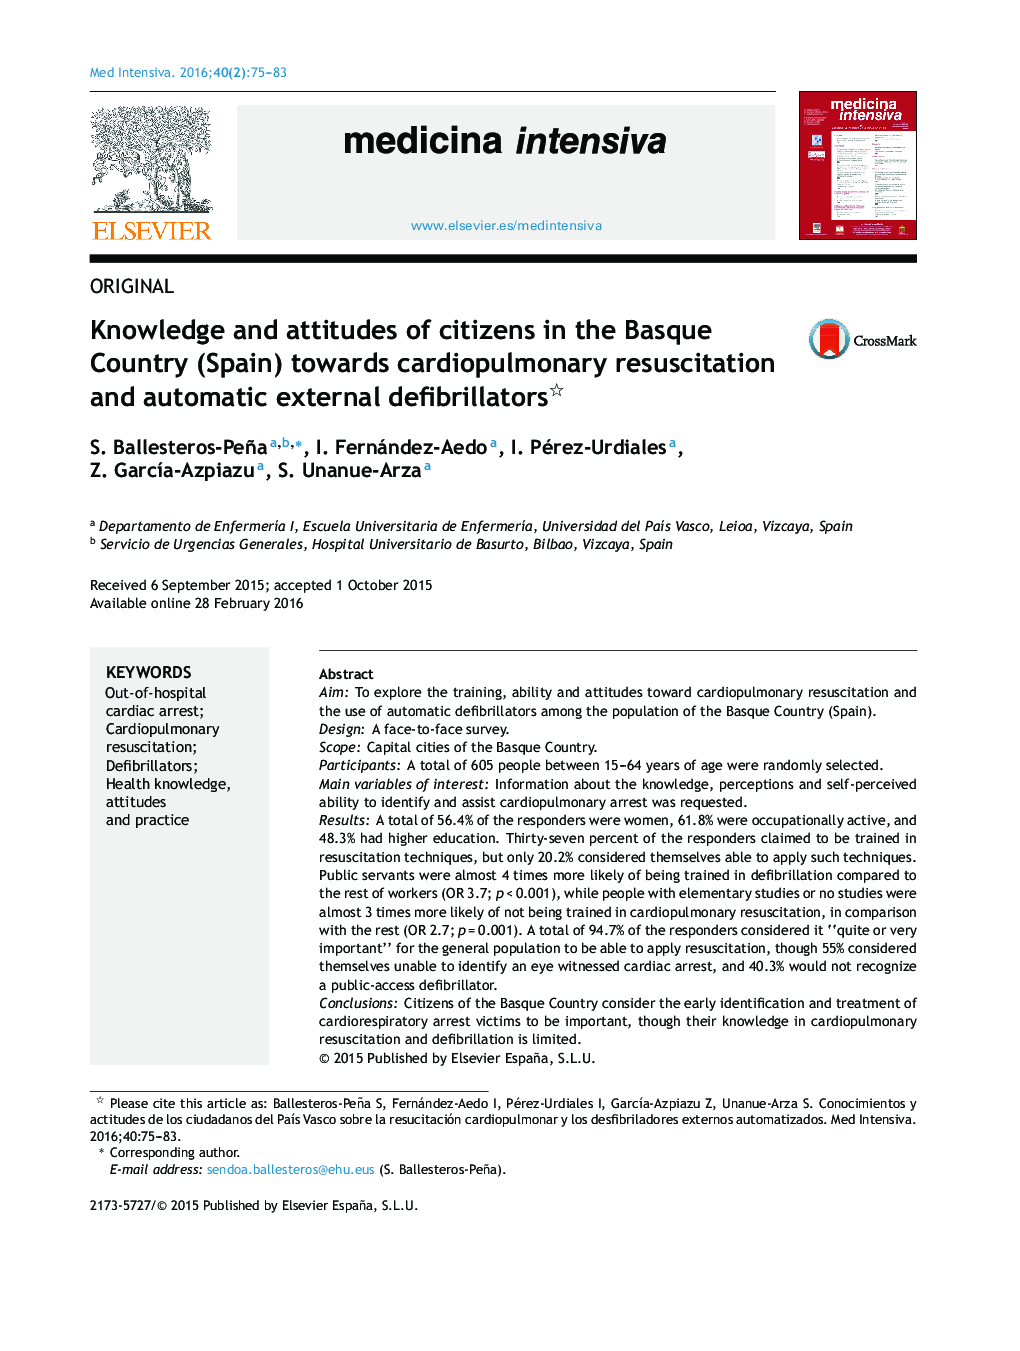 Knowledge and attitudes of citizens in the Basque Country (Spain) towards cardiopulmonary resuscitation and automatic external defibrillators 